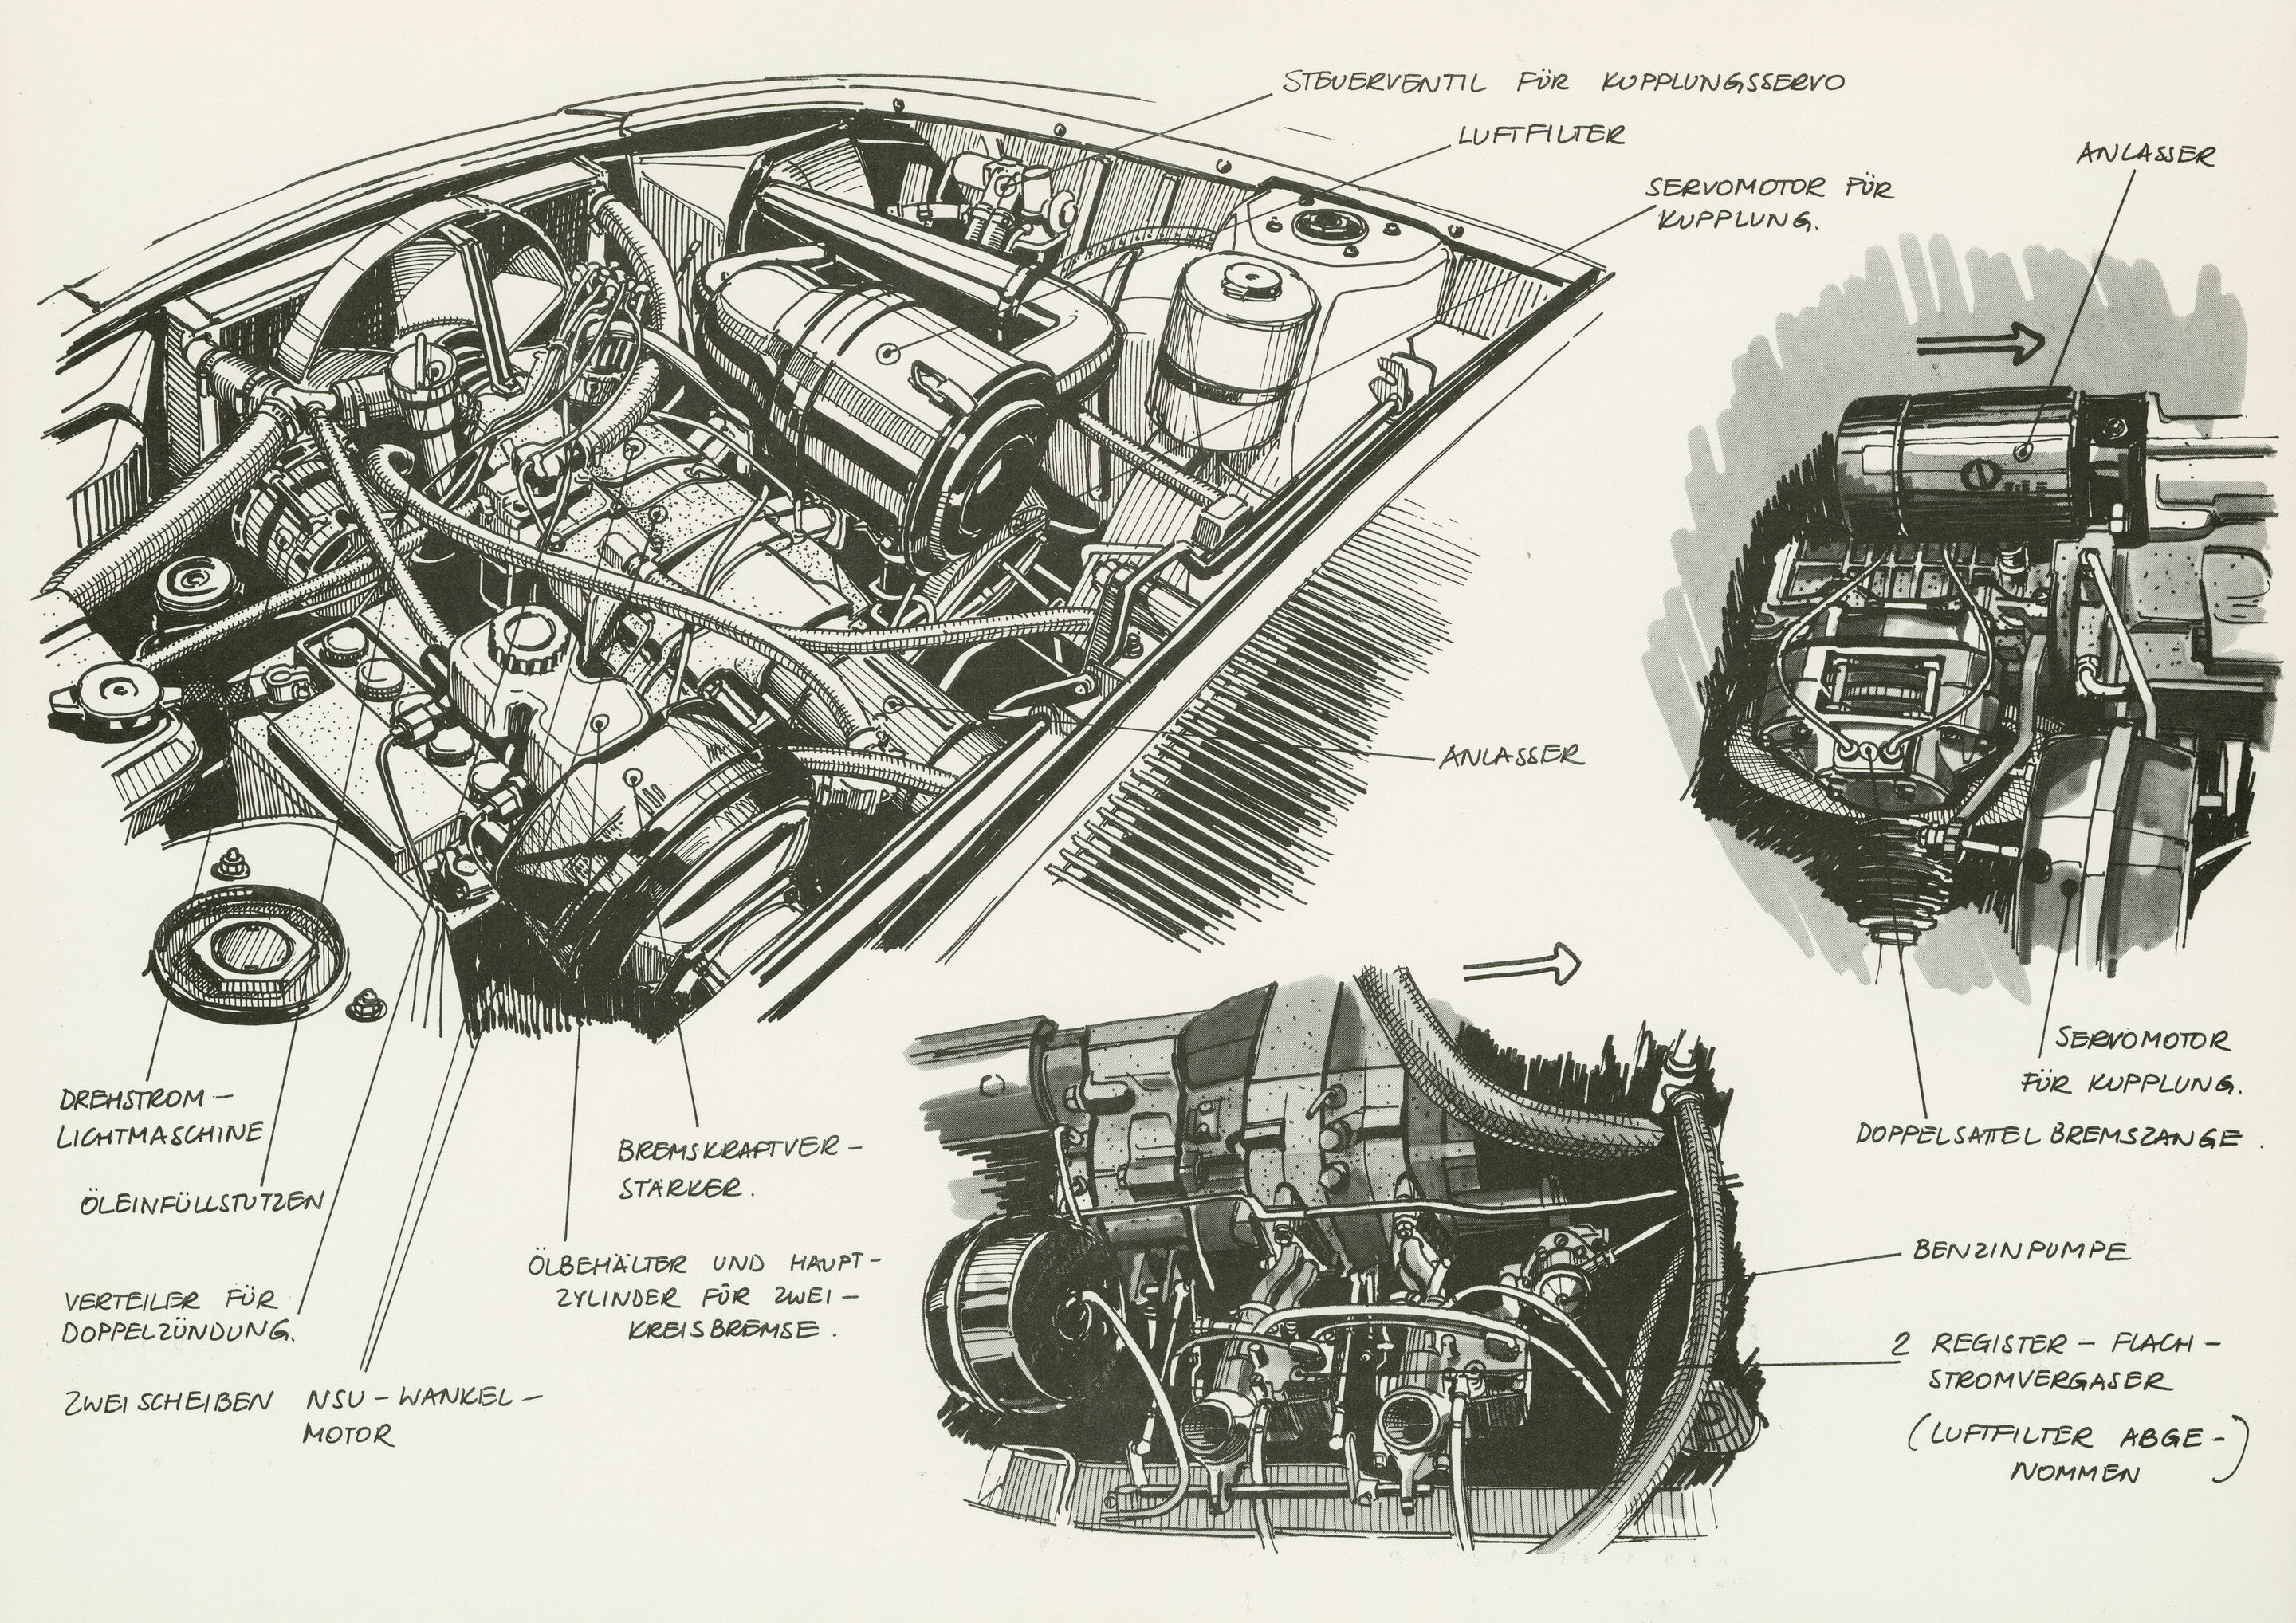 Design drawing of the NSU Ro 80’s twin-disc rotary engine